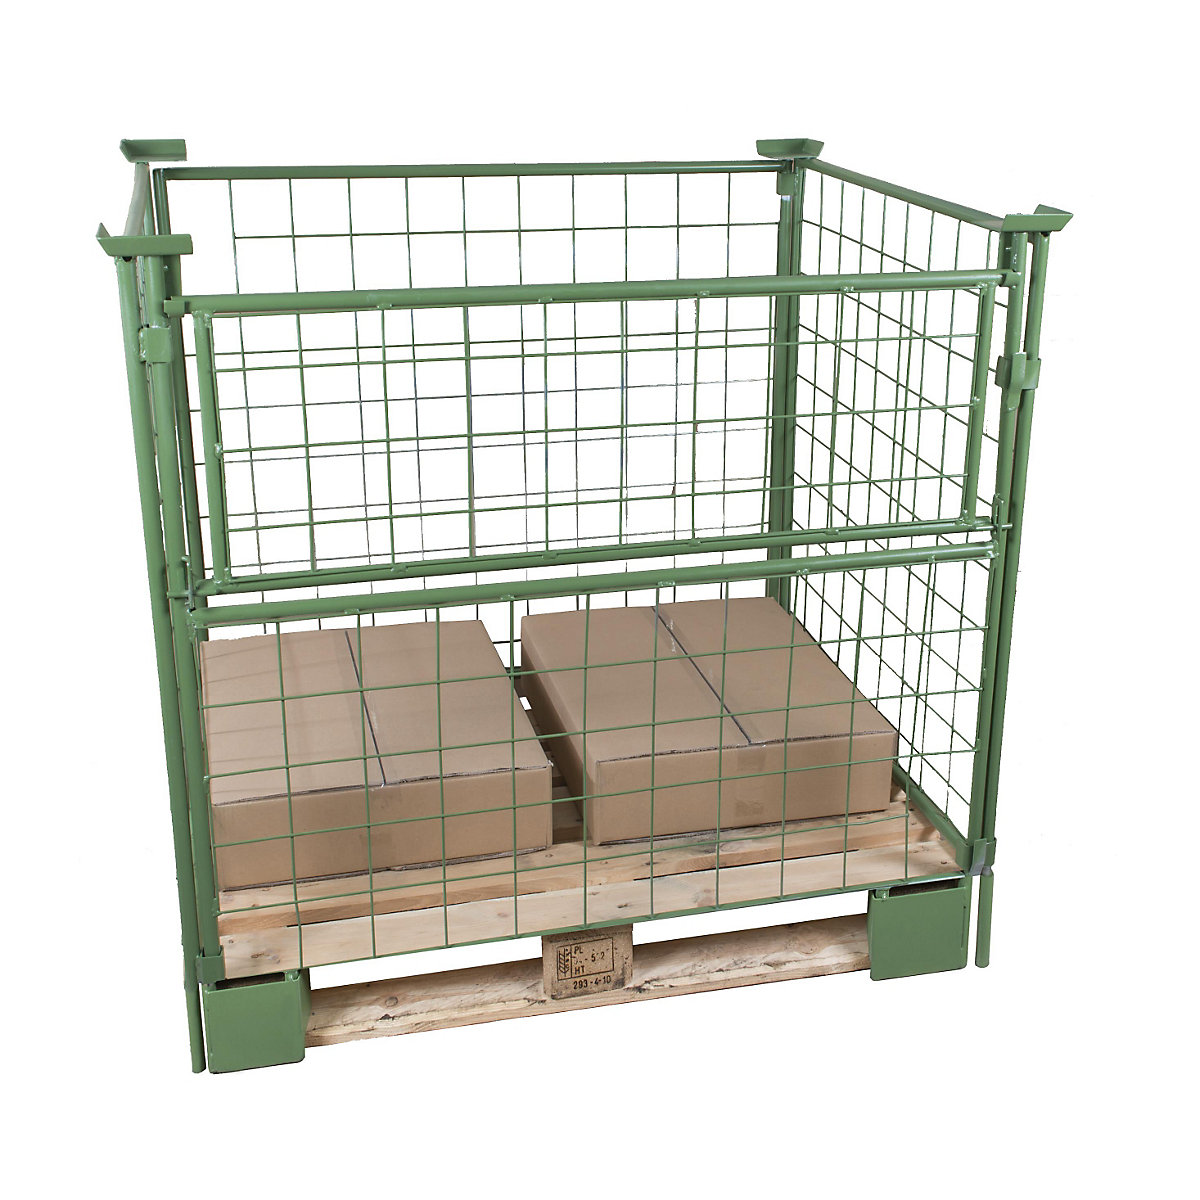 Pallet frame, effective height 1200 mm, for stacking, WxL 800 x 1200 mm, 1 long side can be half folded